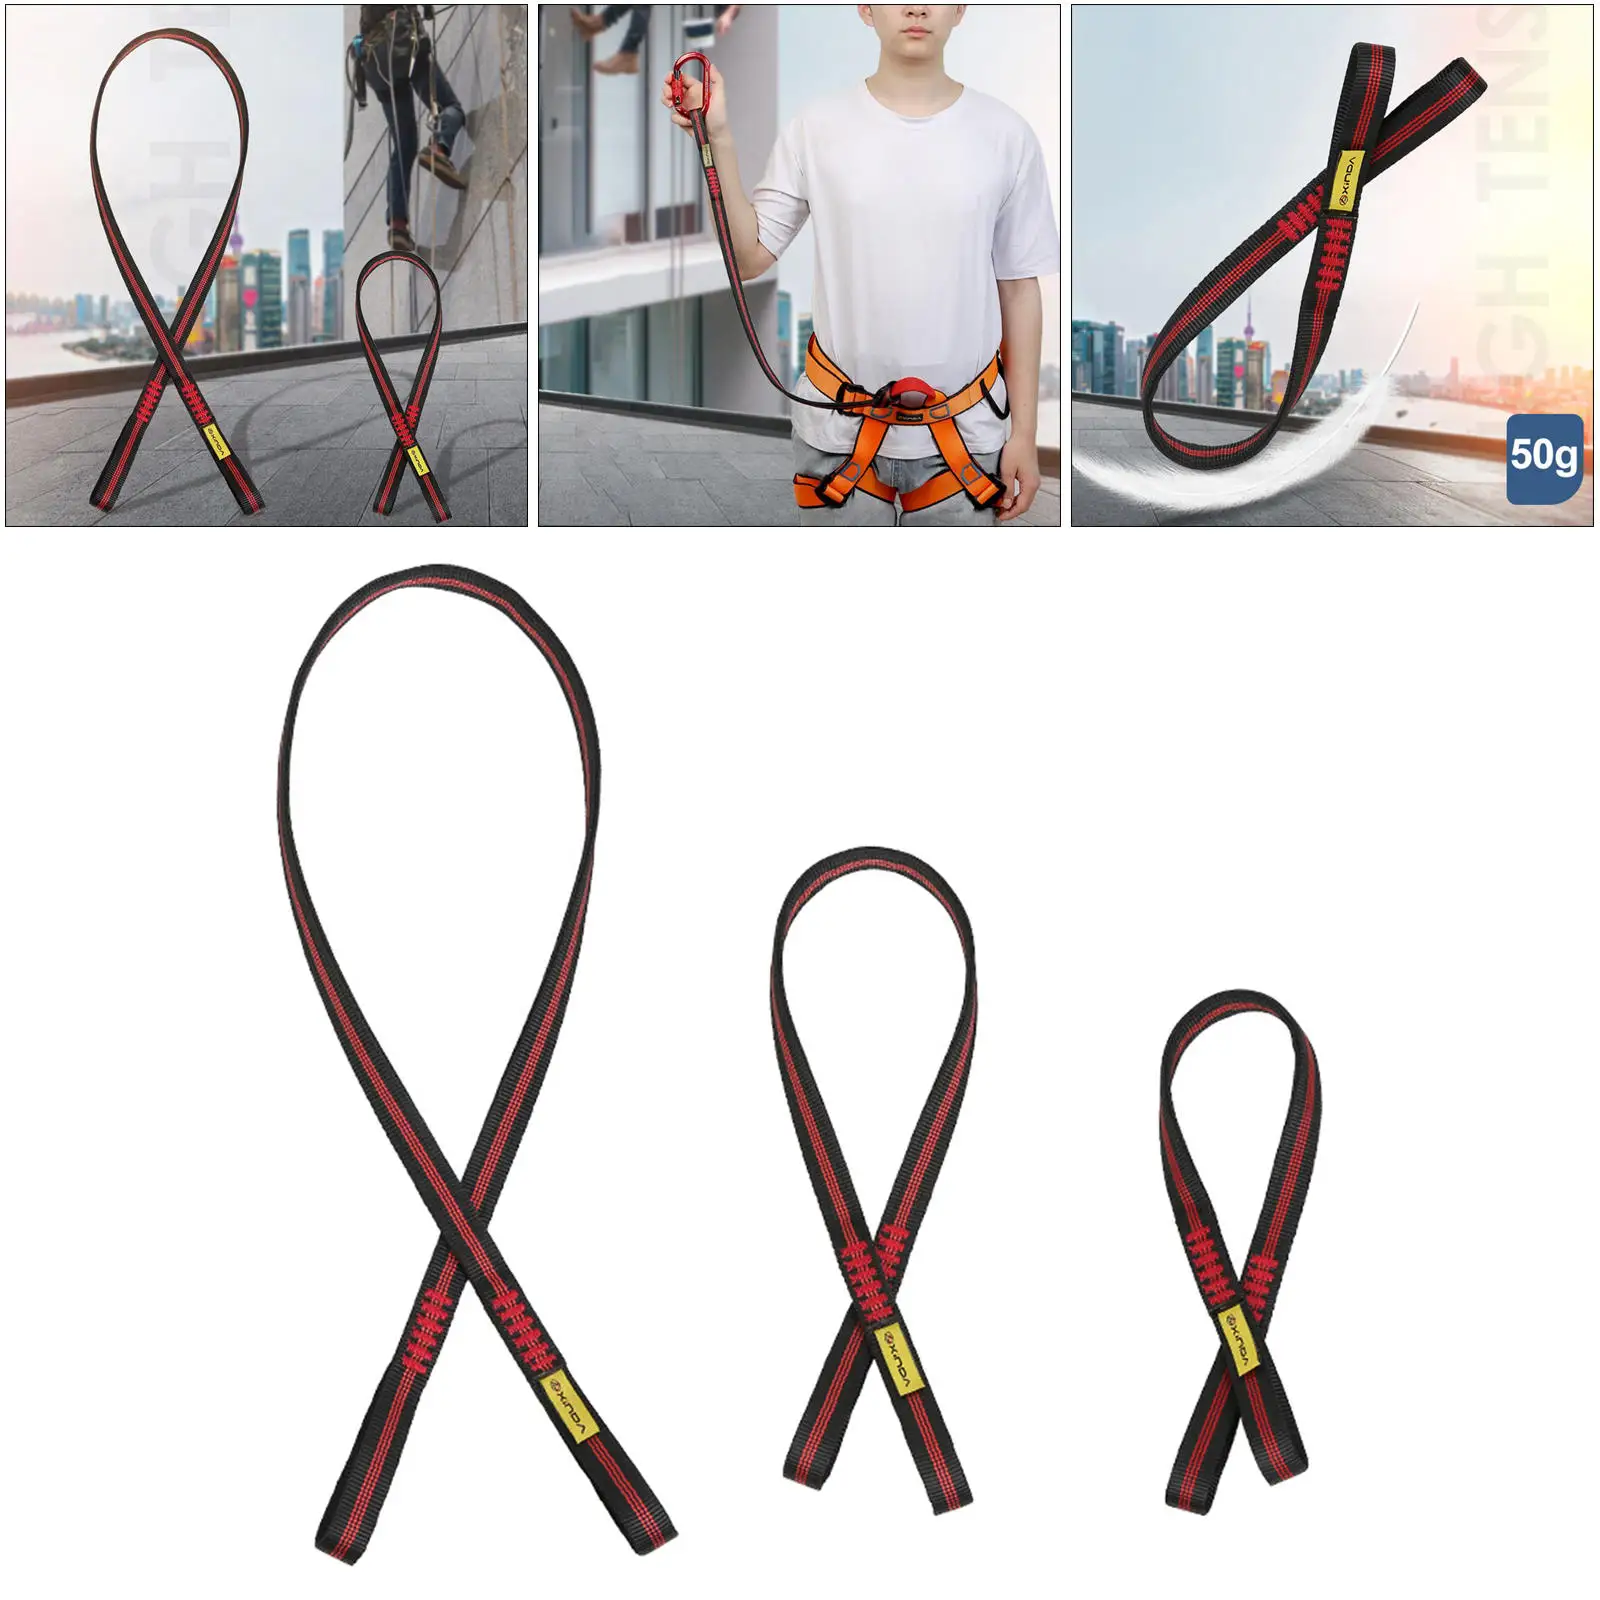 Nylon Sling Runner Climbing Utility Cord 22KN Used for Rock Climbing Rappelling and Other High Altitude Operations